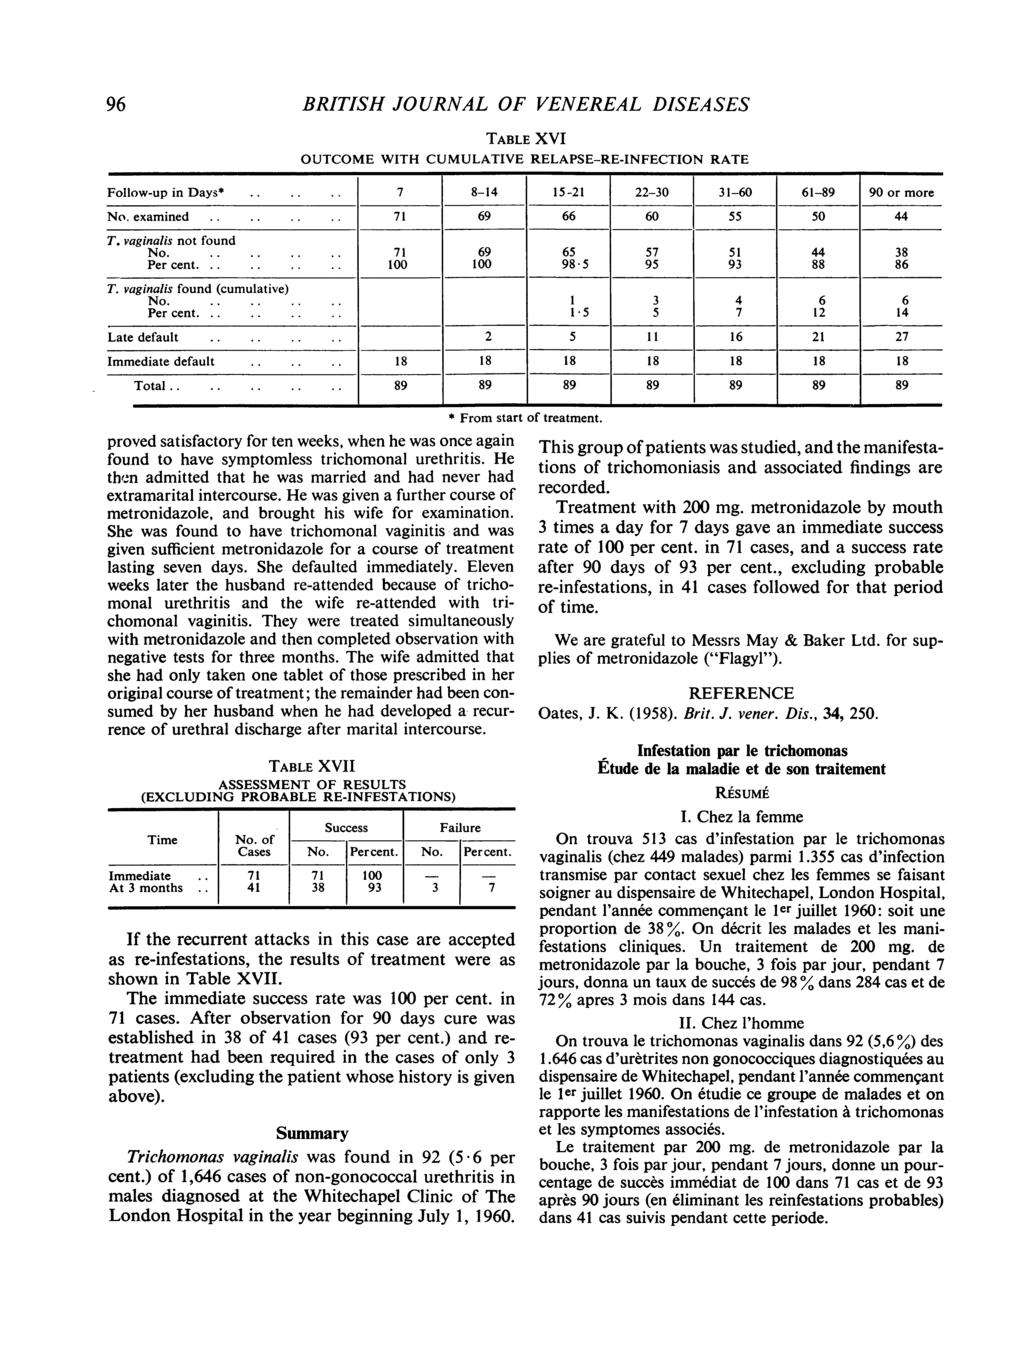 96 BRITISH JOURNAL OF VENEREAL DISEASES OUTCOME WITH TABLE XVI CUMULATIVE RELAPSE-RE-INFECTION RATE Follow-up in Days*.7 8-14 15-21 22-30 31-60 61-89 90 or more No. examined.71 69 66 60 55 50 44 T.